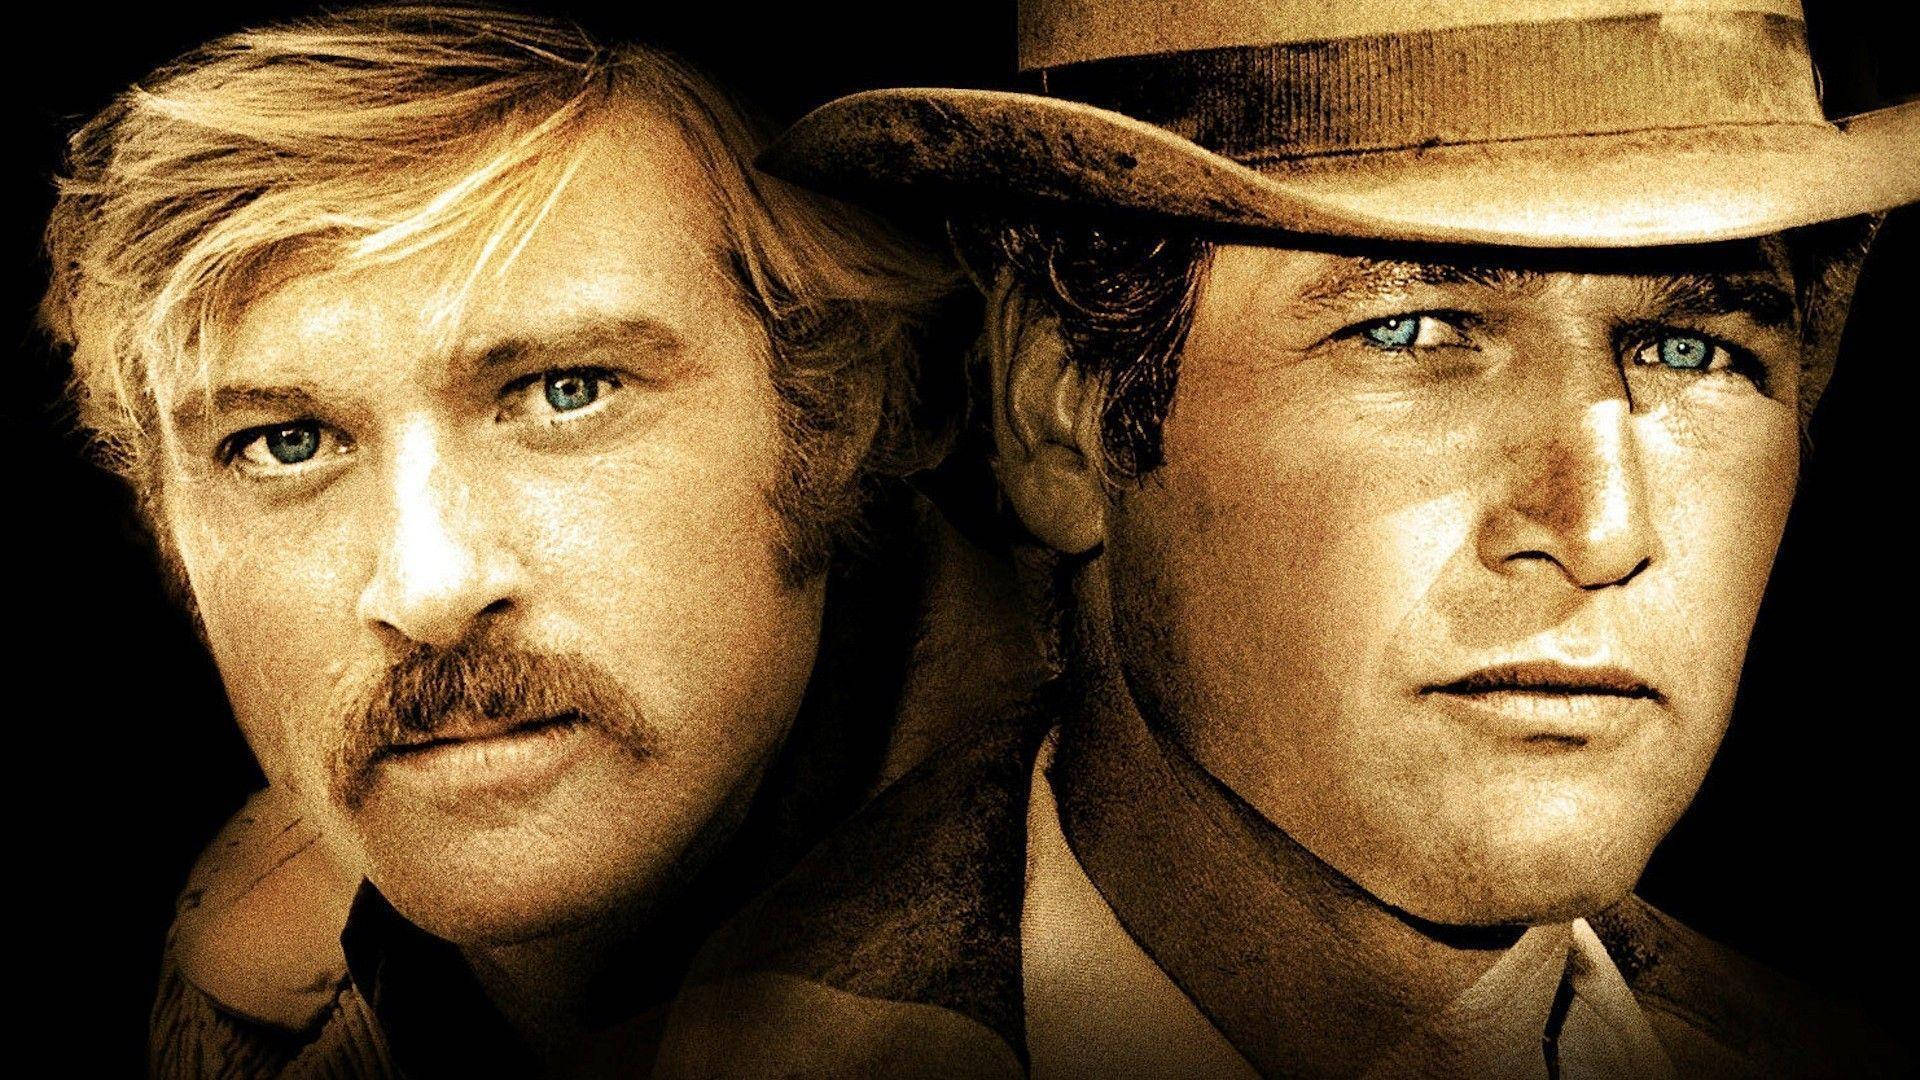 Legendary Actors Paul Newman and Robert Redford on Set in the Iconic 1969 Film Wallpaper